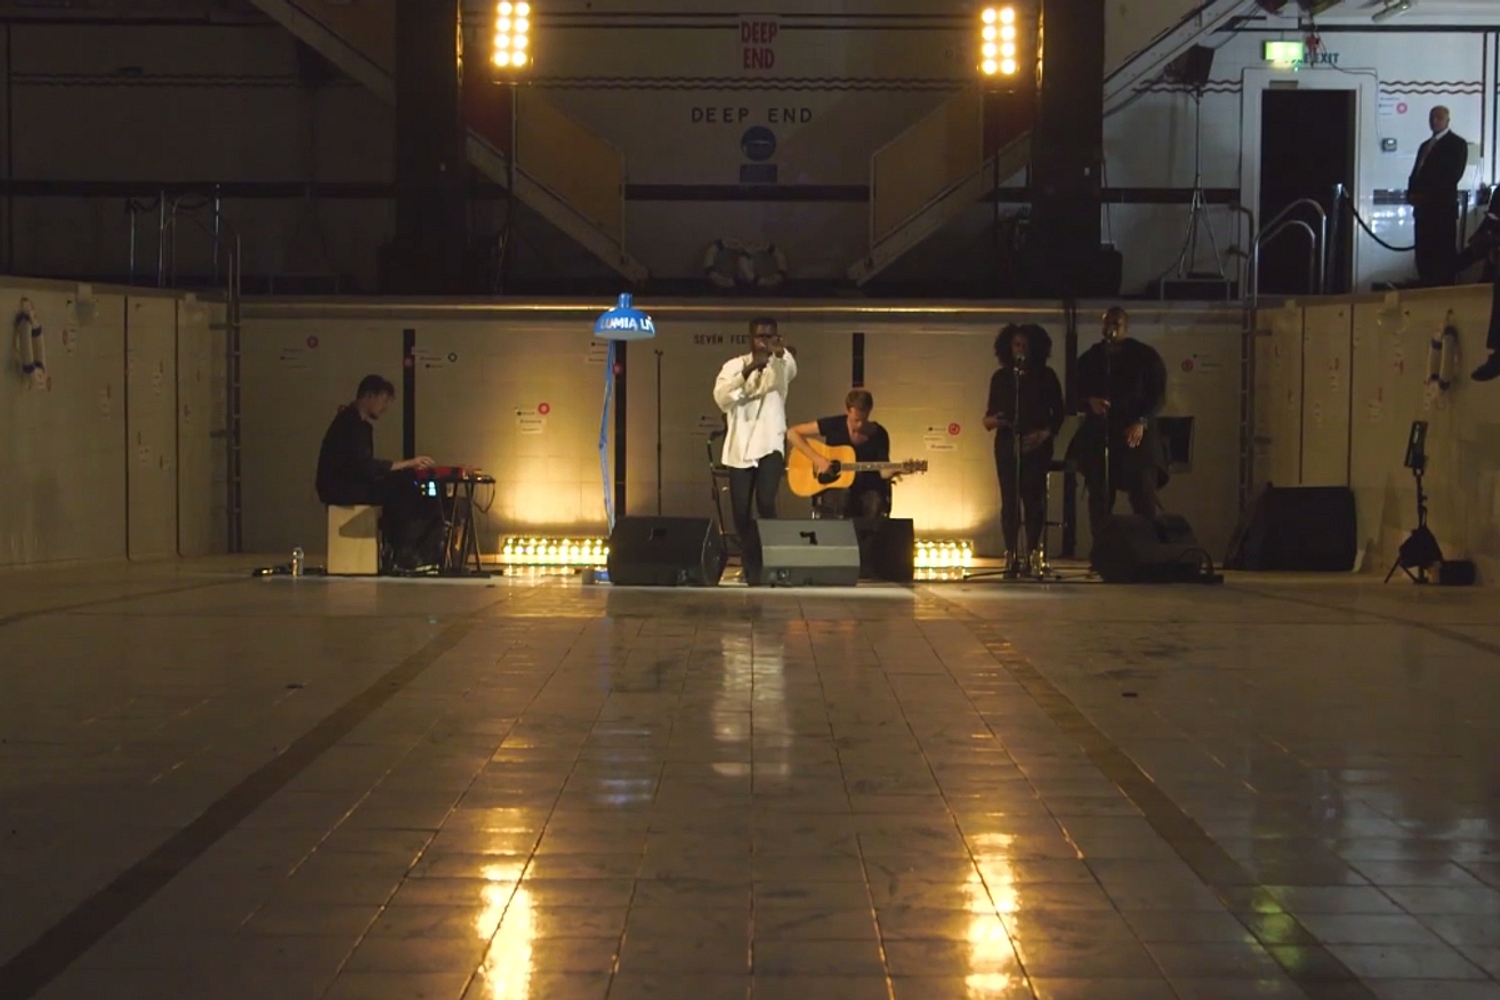 Watch Kwabs perform ‘Walk’ in a swimming pool for La Blogothèque